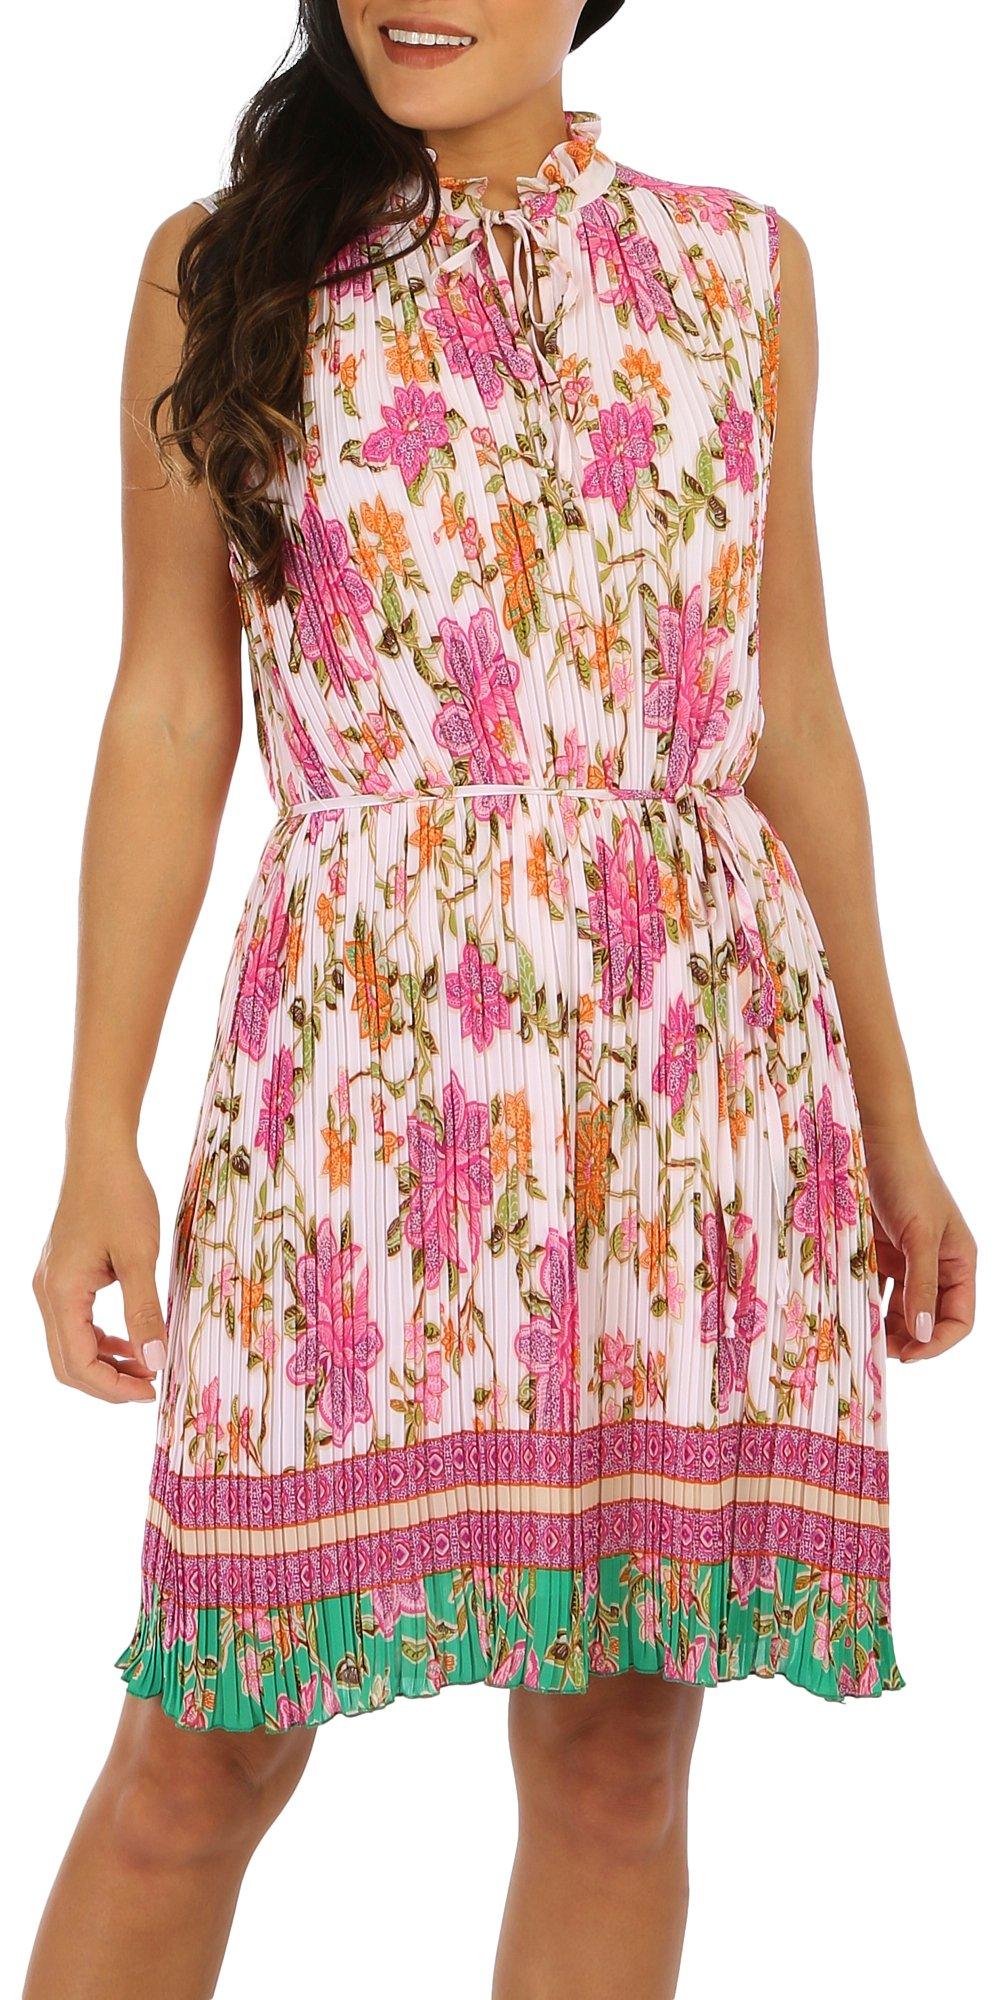 Emma & Michelle Womens Floral Pleated Sleeveless Dress